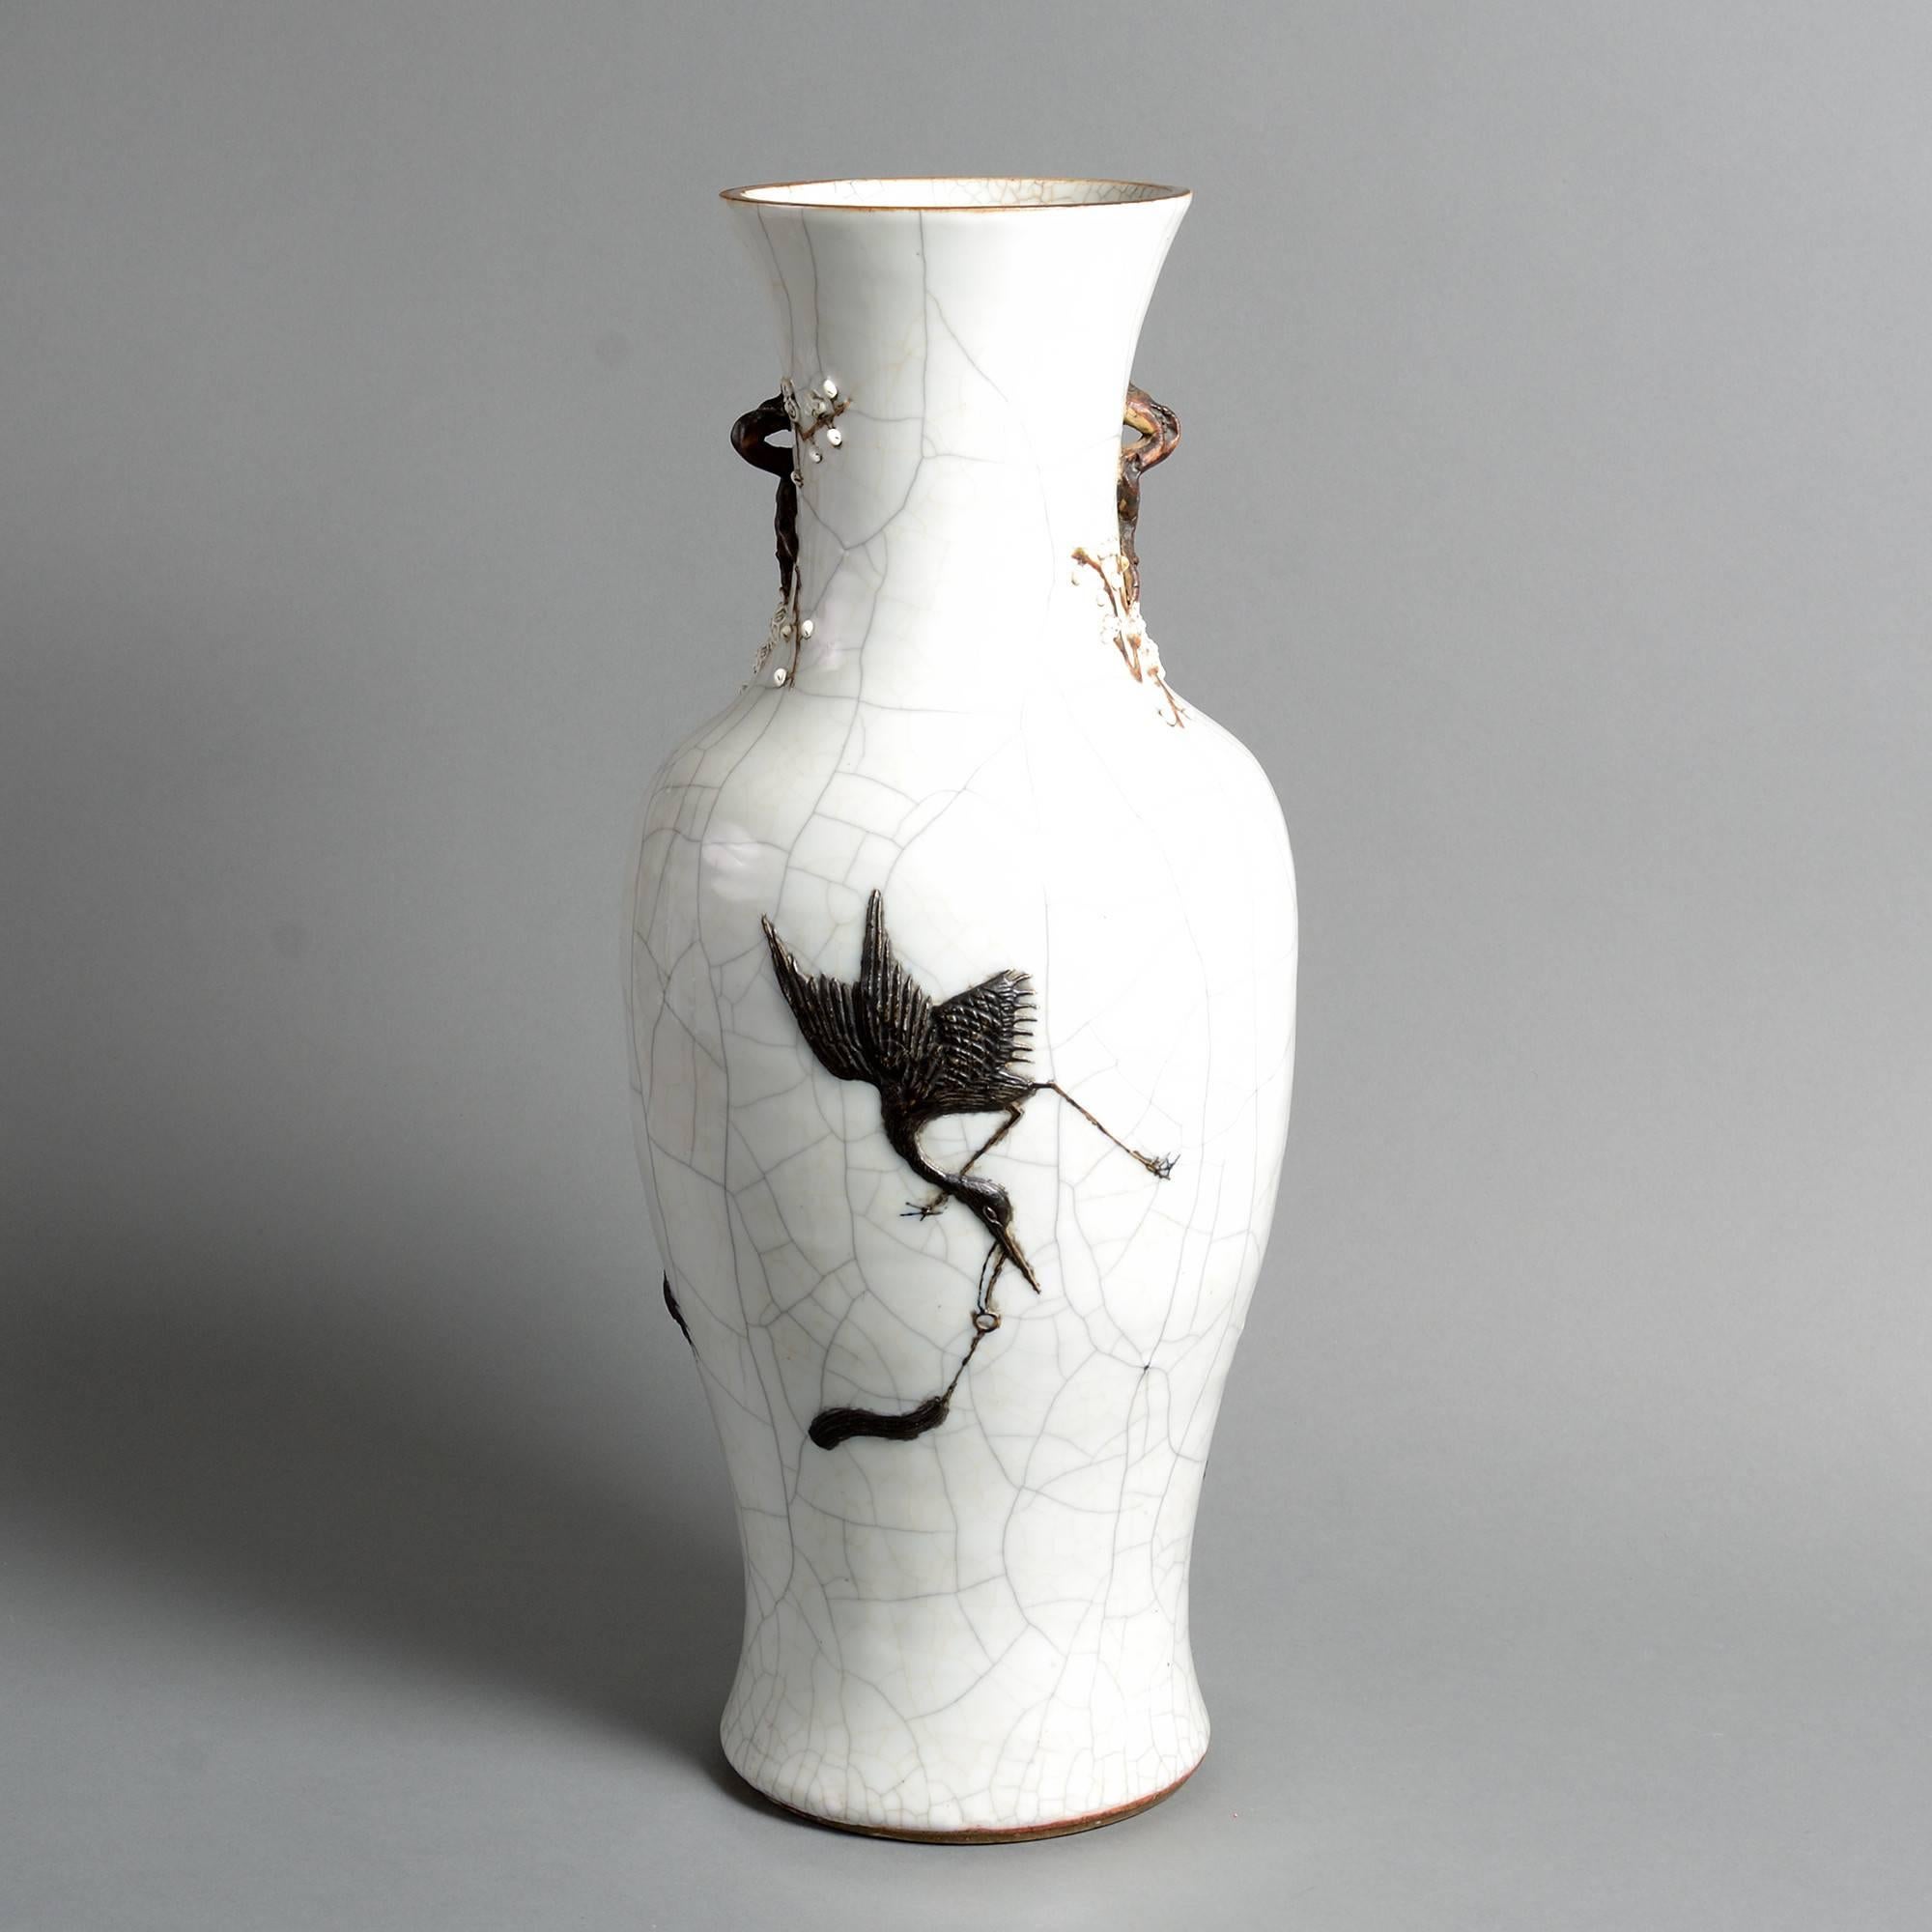 A late 19th century porcelain vase, having an applied black glazed dragon upon a white crackle ground. 

Qing dynasty.

Guangxu period (1875-1908).